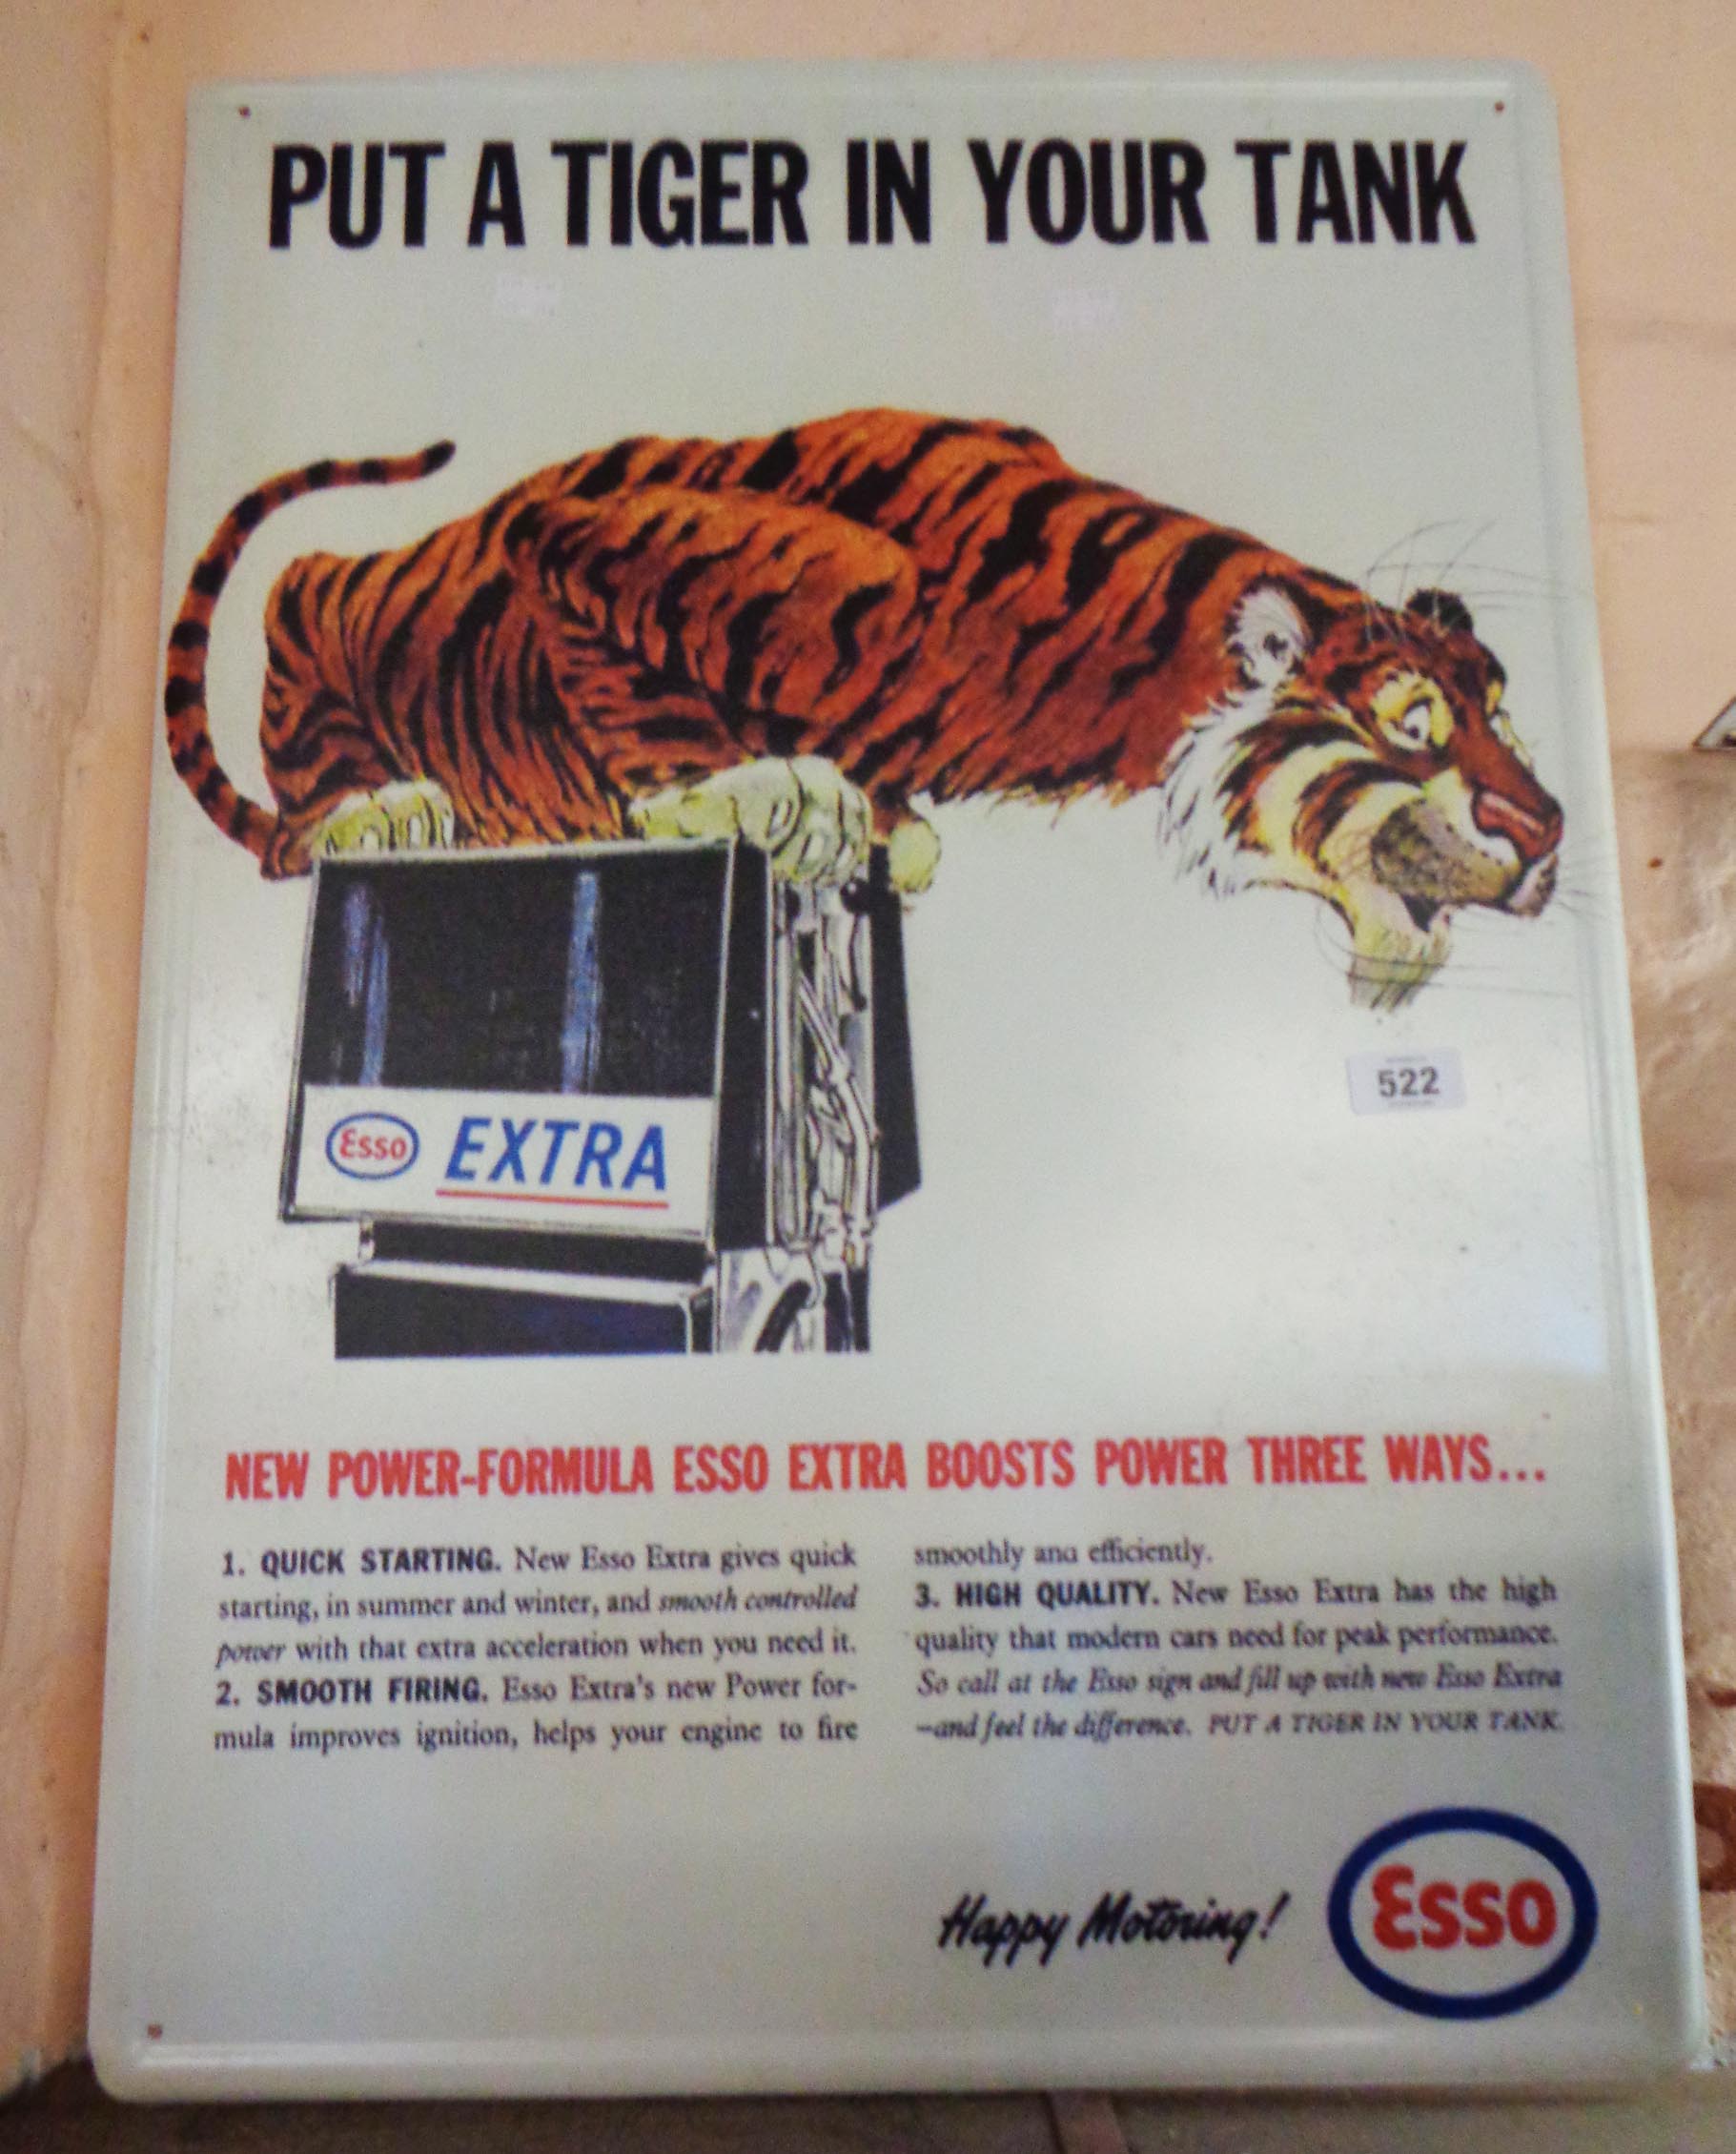 A modern printed tin Esso tiger advertising sign